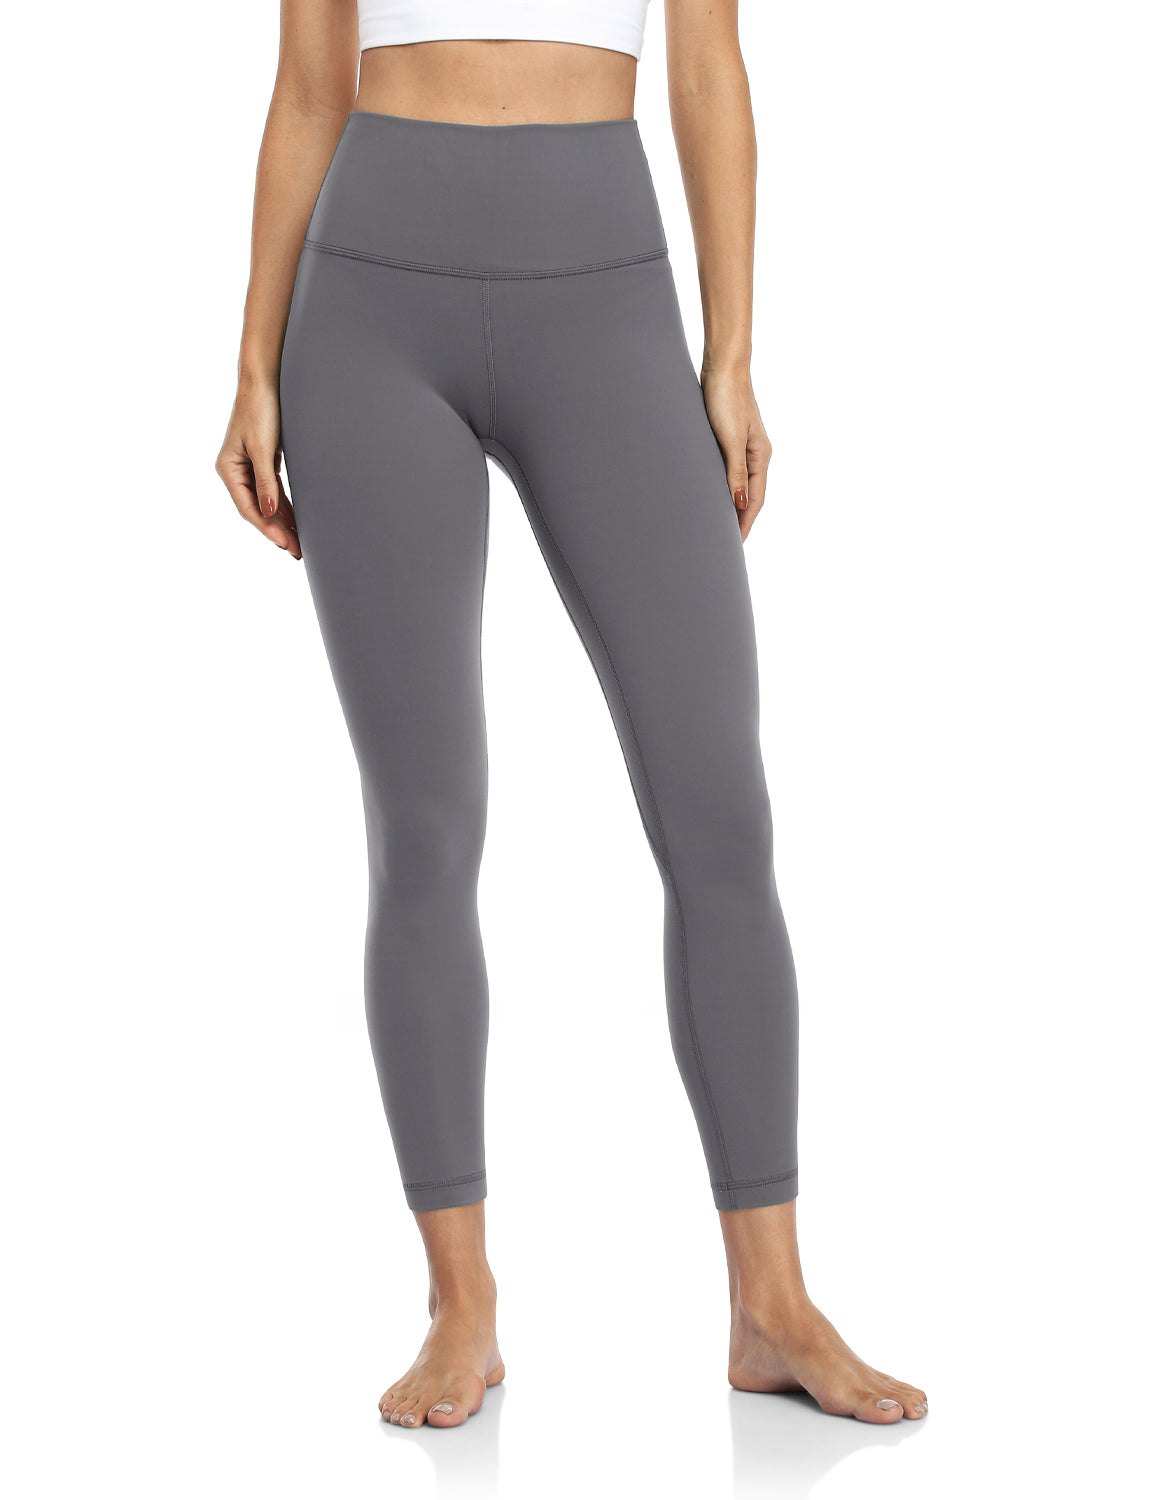  HeyNuts Essential High Waisted Yoga Leggings for Tall Women,  Buttery Soft Full Length Workout Pants 28'' Carbon Dust XS(0/2) : Clothing,  Shoes & Jewelry